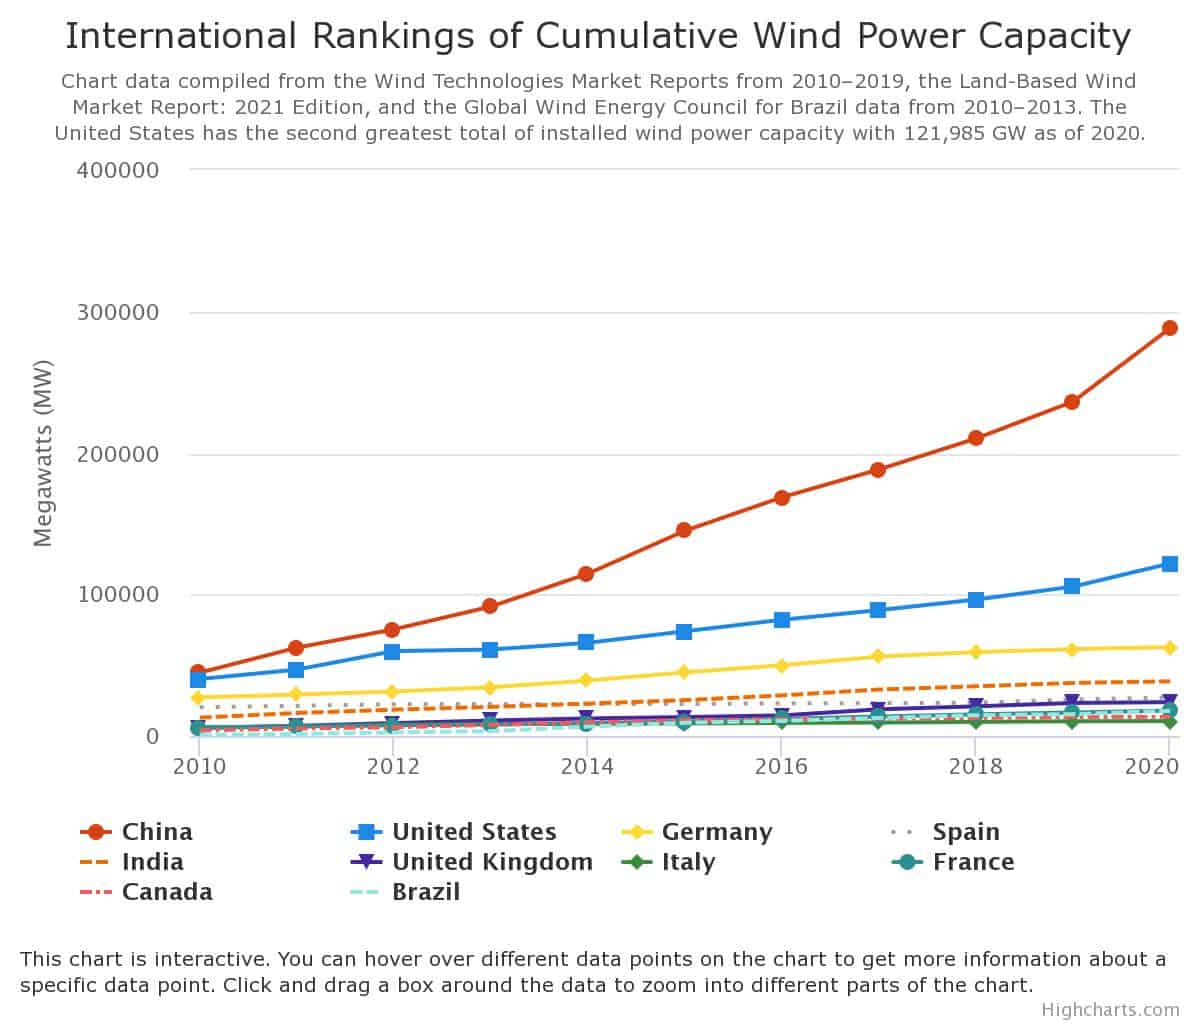 Cummulative wind power capacity ranking figures for 10 countries